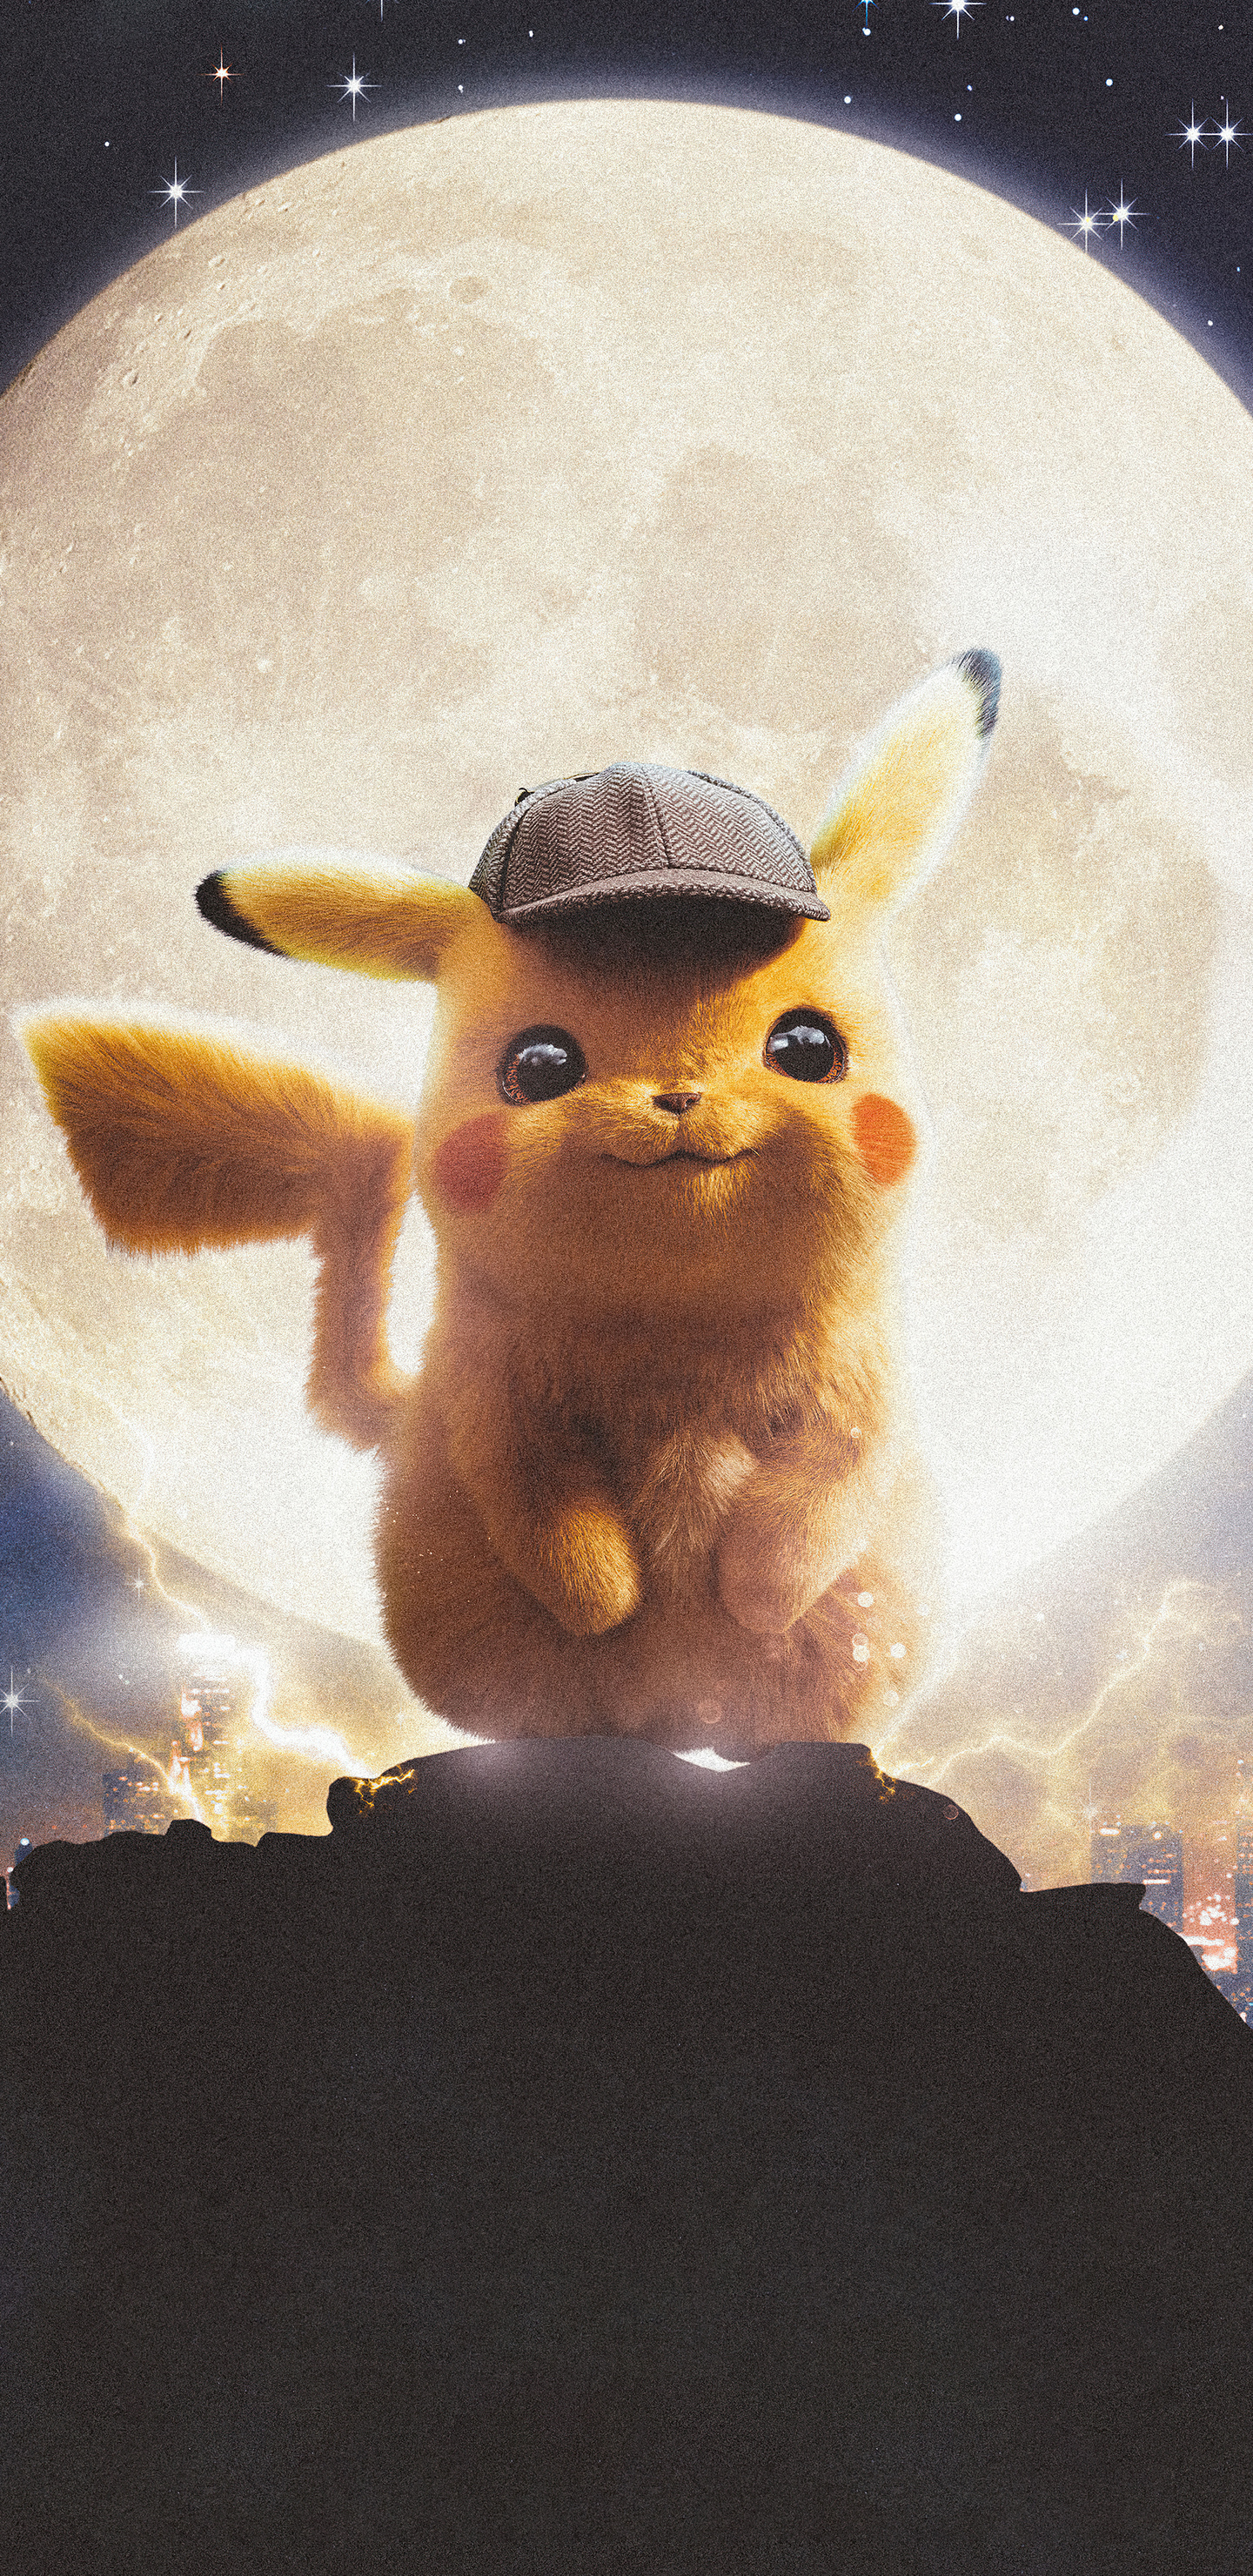 1440x2960 Pokemon Detective Pikachu Poster 5k Samsung Galaxy Note 9,8,  S9,S8,S8+ QHD HD 4k Wallpapers, Images, Backgrounds, Photos and Pictures